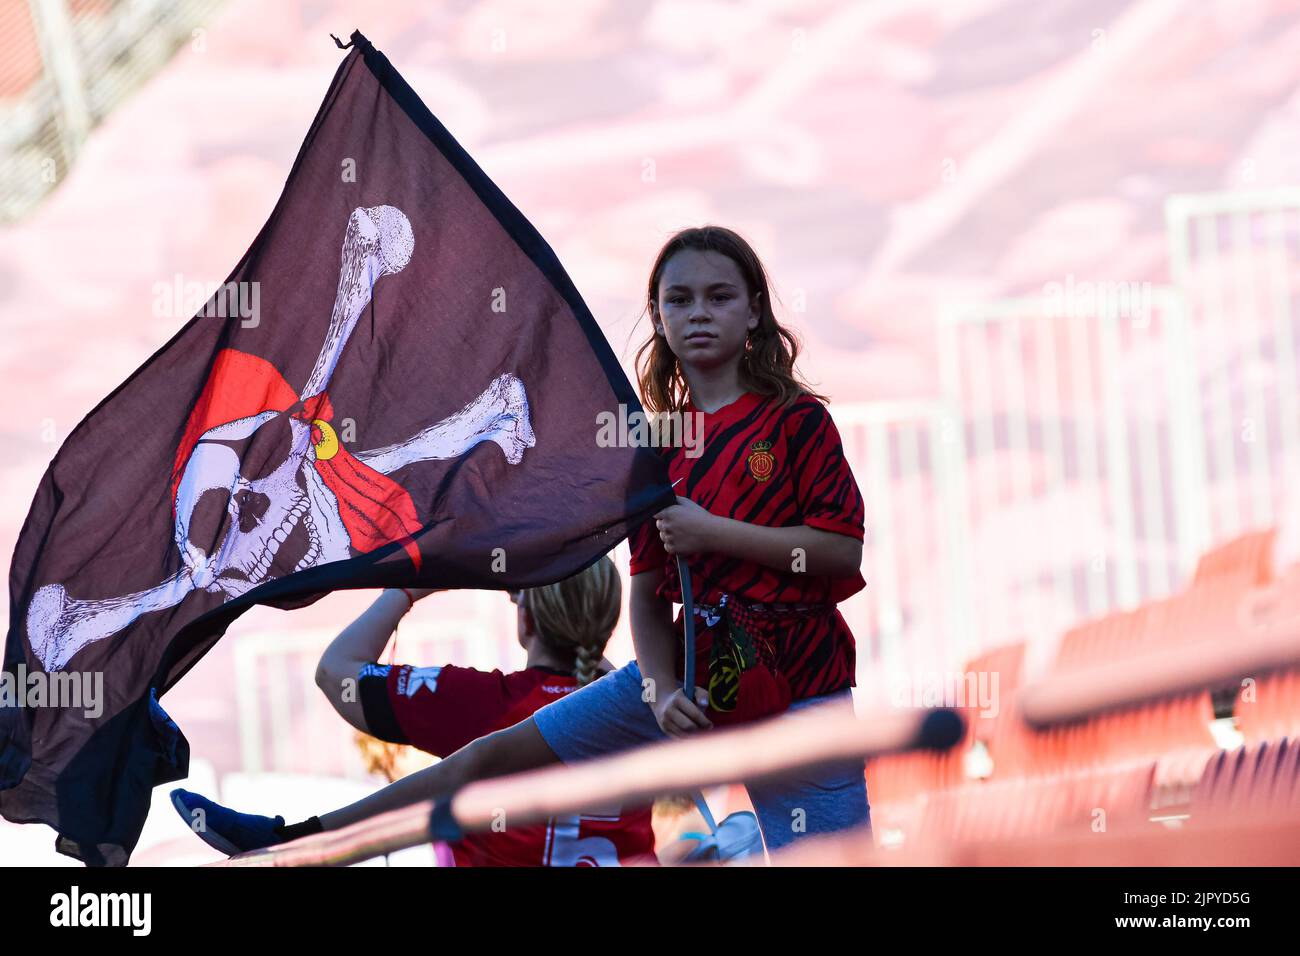 MALLORCA, SPAIN - AUGUST 20: Fangirl of RCD Mallorca before the match between RCD Mallorca and Real Betis of La Liga Santander on August 20, 2022 at Visit Mallorca Stadium Son Moix in Mallorca, Spain. (Photo by Samuel Carreño/PxImages) Stock Photo